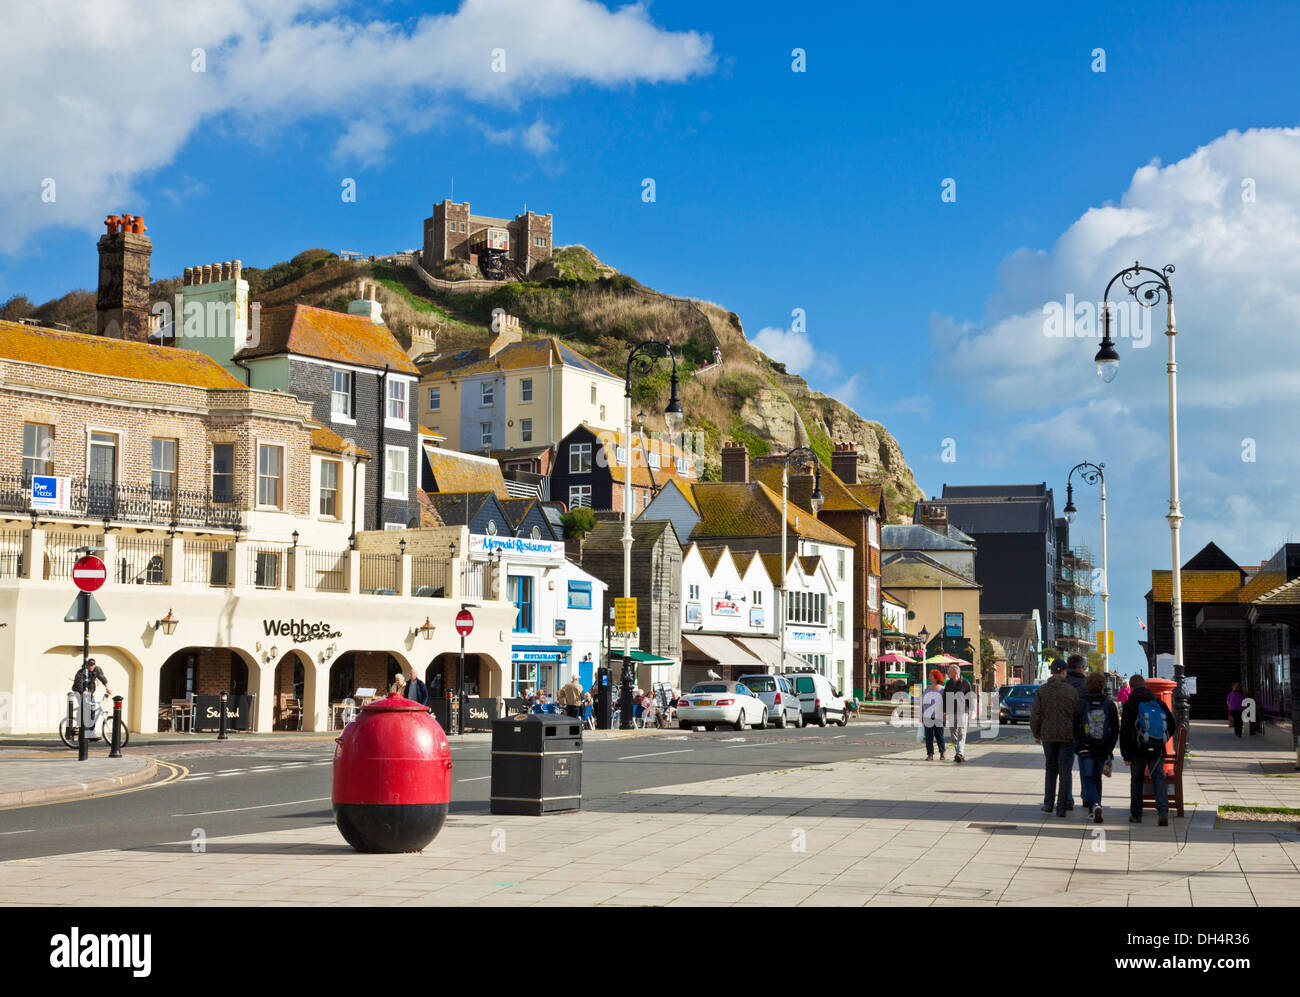 Hastings Old town and Funicular cliff beach railway at Hastings East Sussex England GB UK Europe Stock Photo